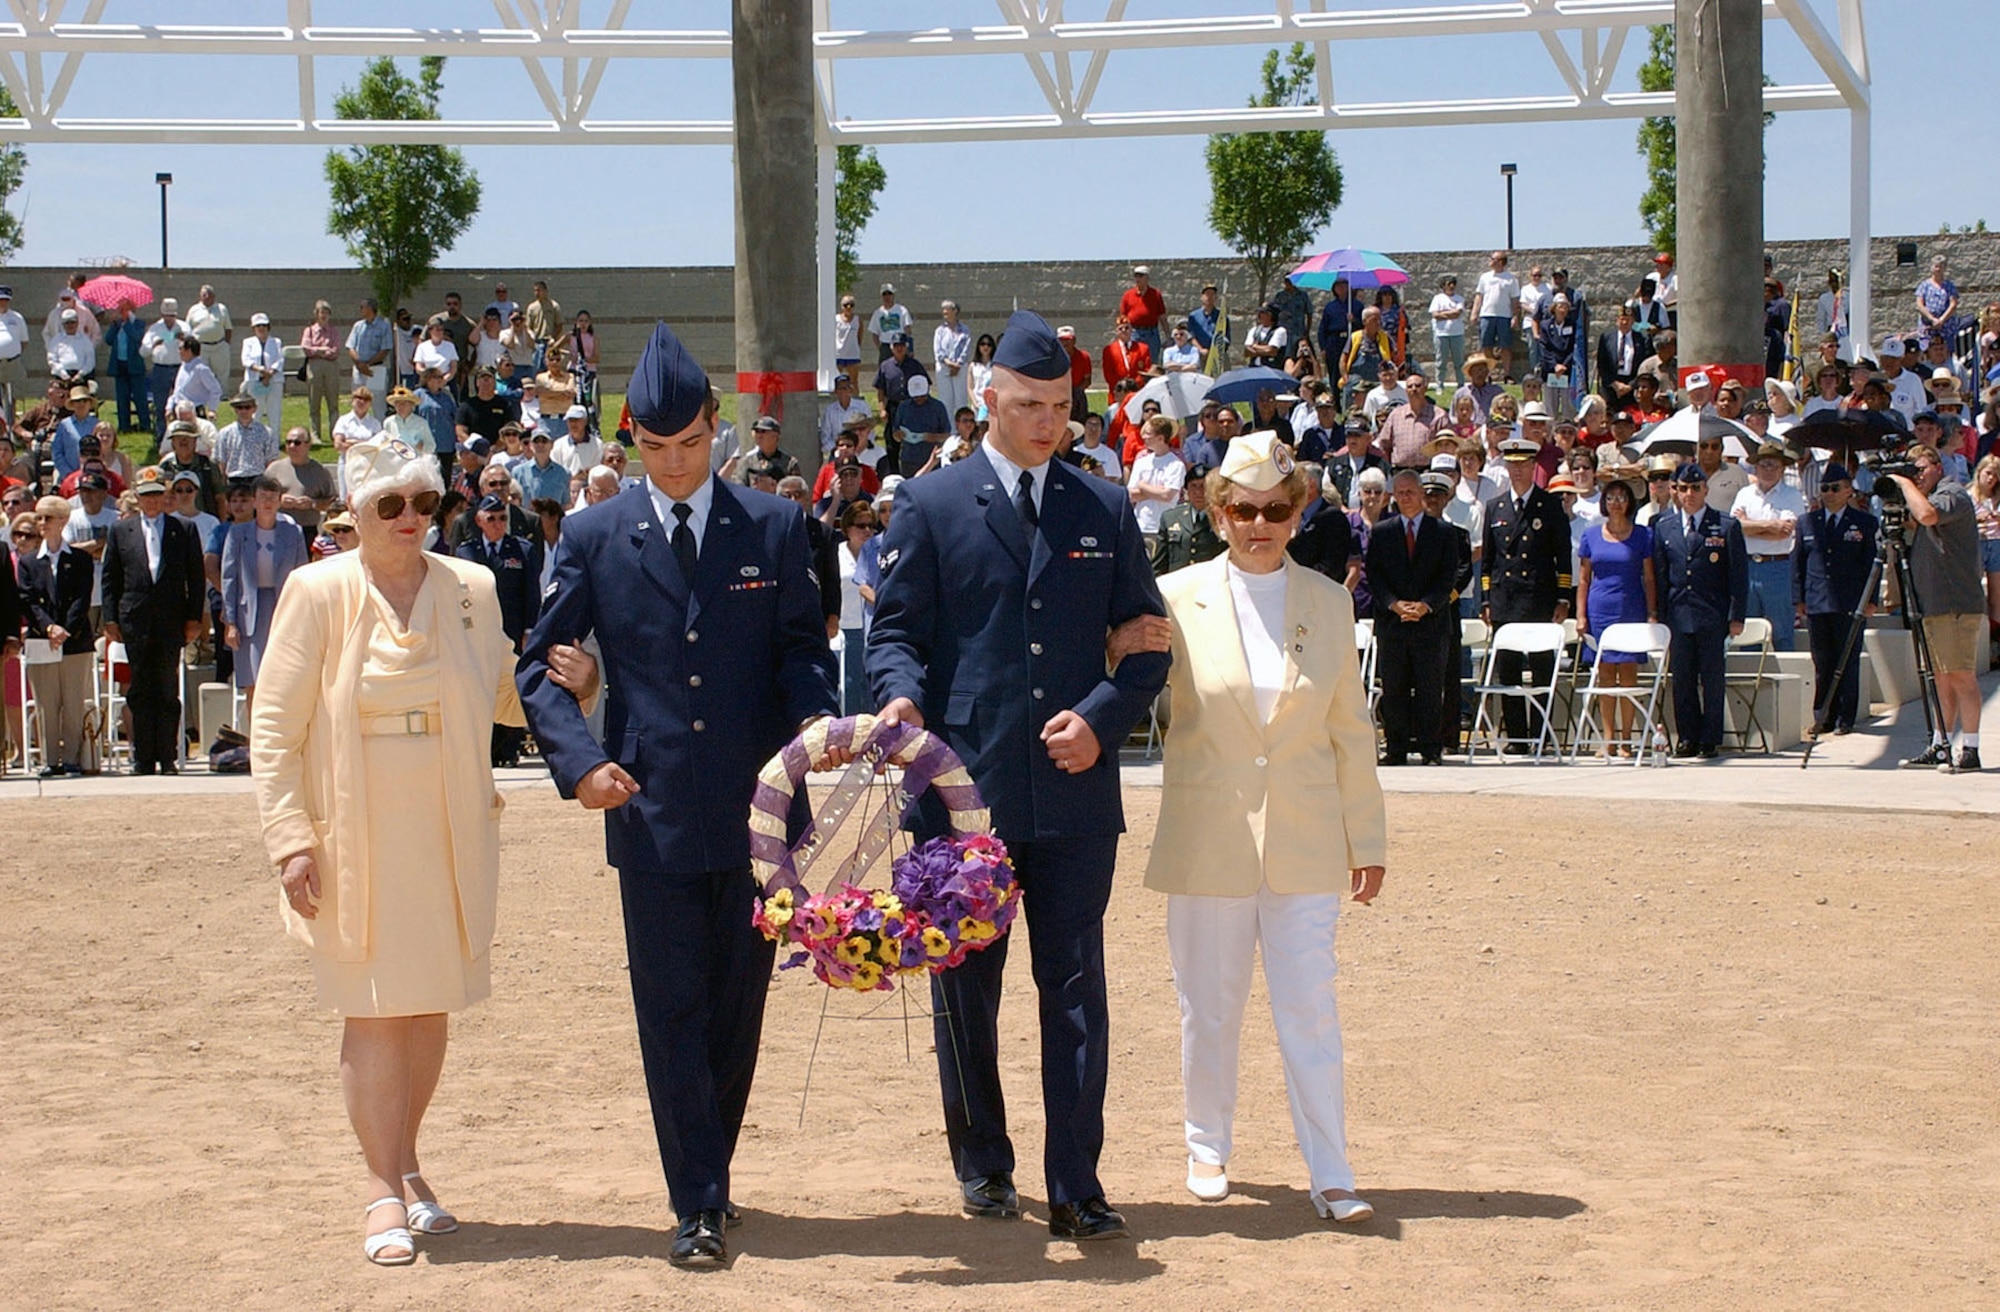 Remembering those who died for our freedom: two members of the 377th Security Forces Squadron (SFS), Master Sergeant (MSGT) Timothy Uding and Senior Airman (SRA) Neng Hang, escort God Star Mothers Carmen Lopez and Florence Williams, while they place a wreath in remembrance of sons and daughters who did not return from war, at the New Mexico Veterans Memorial Park, Albuquerque, N.M. (Photo courtesy of DVIC)